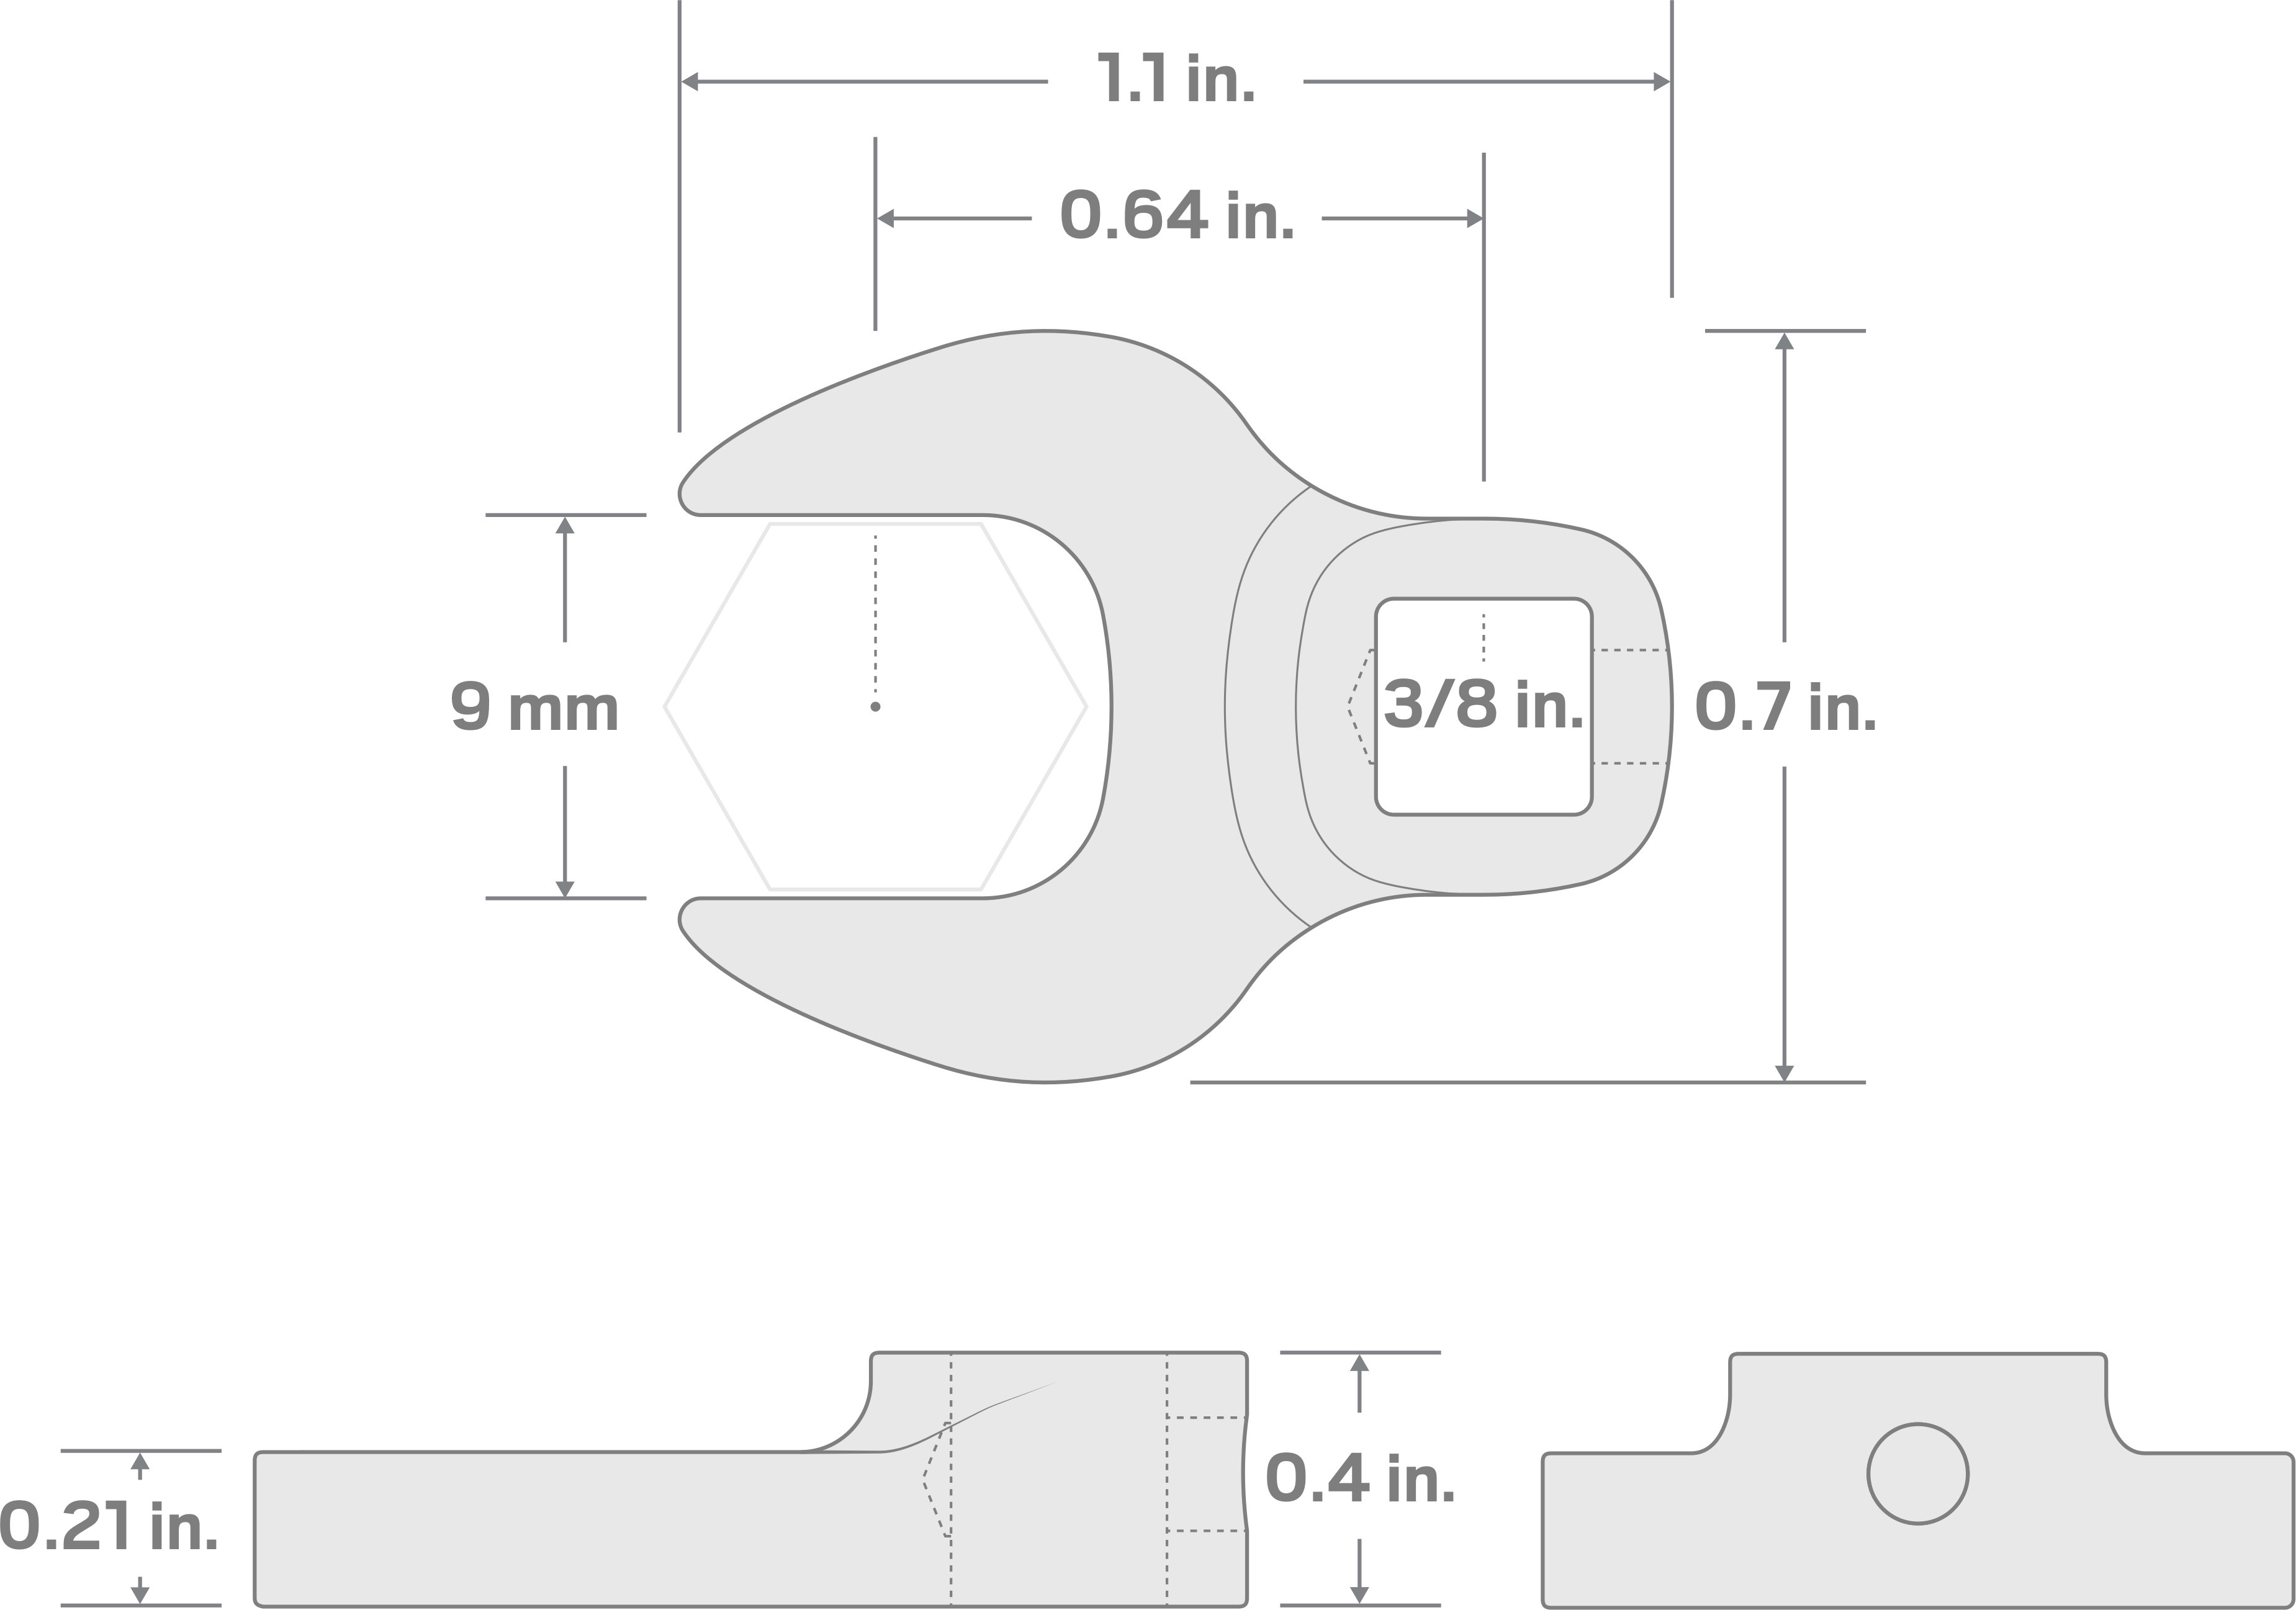 Specs for 3/8 Inch Drive x 9 mm Crowfoot Wrench